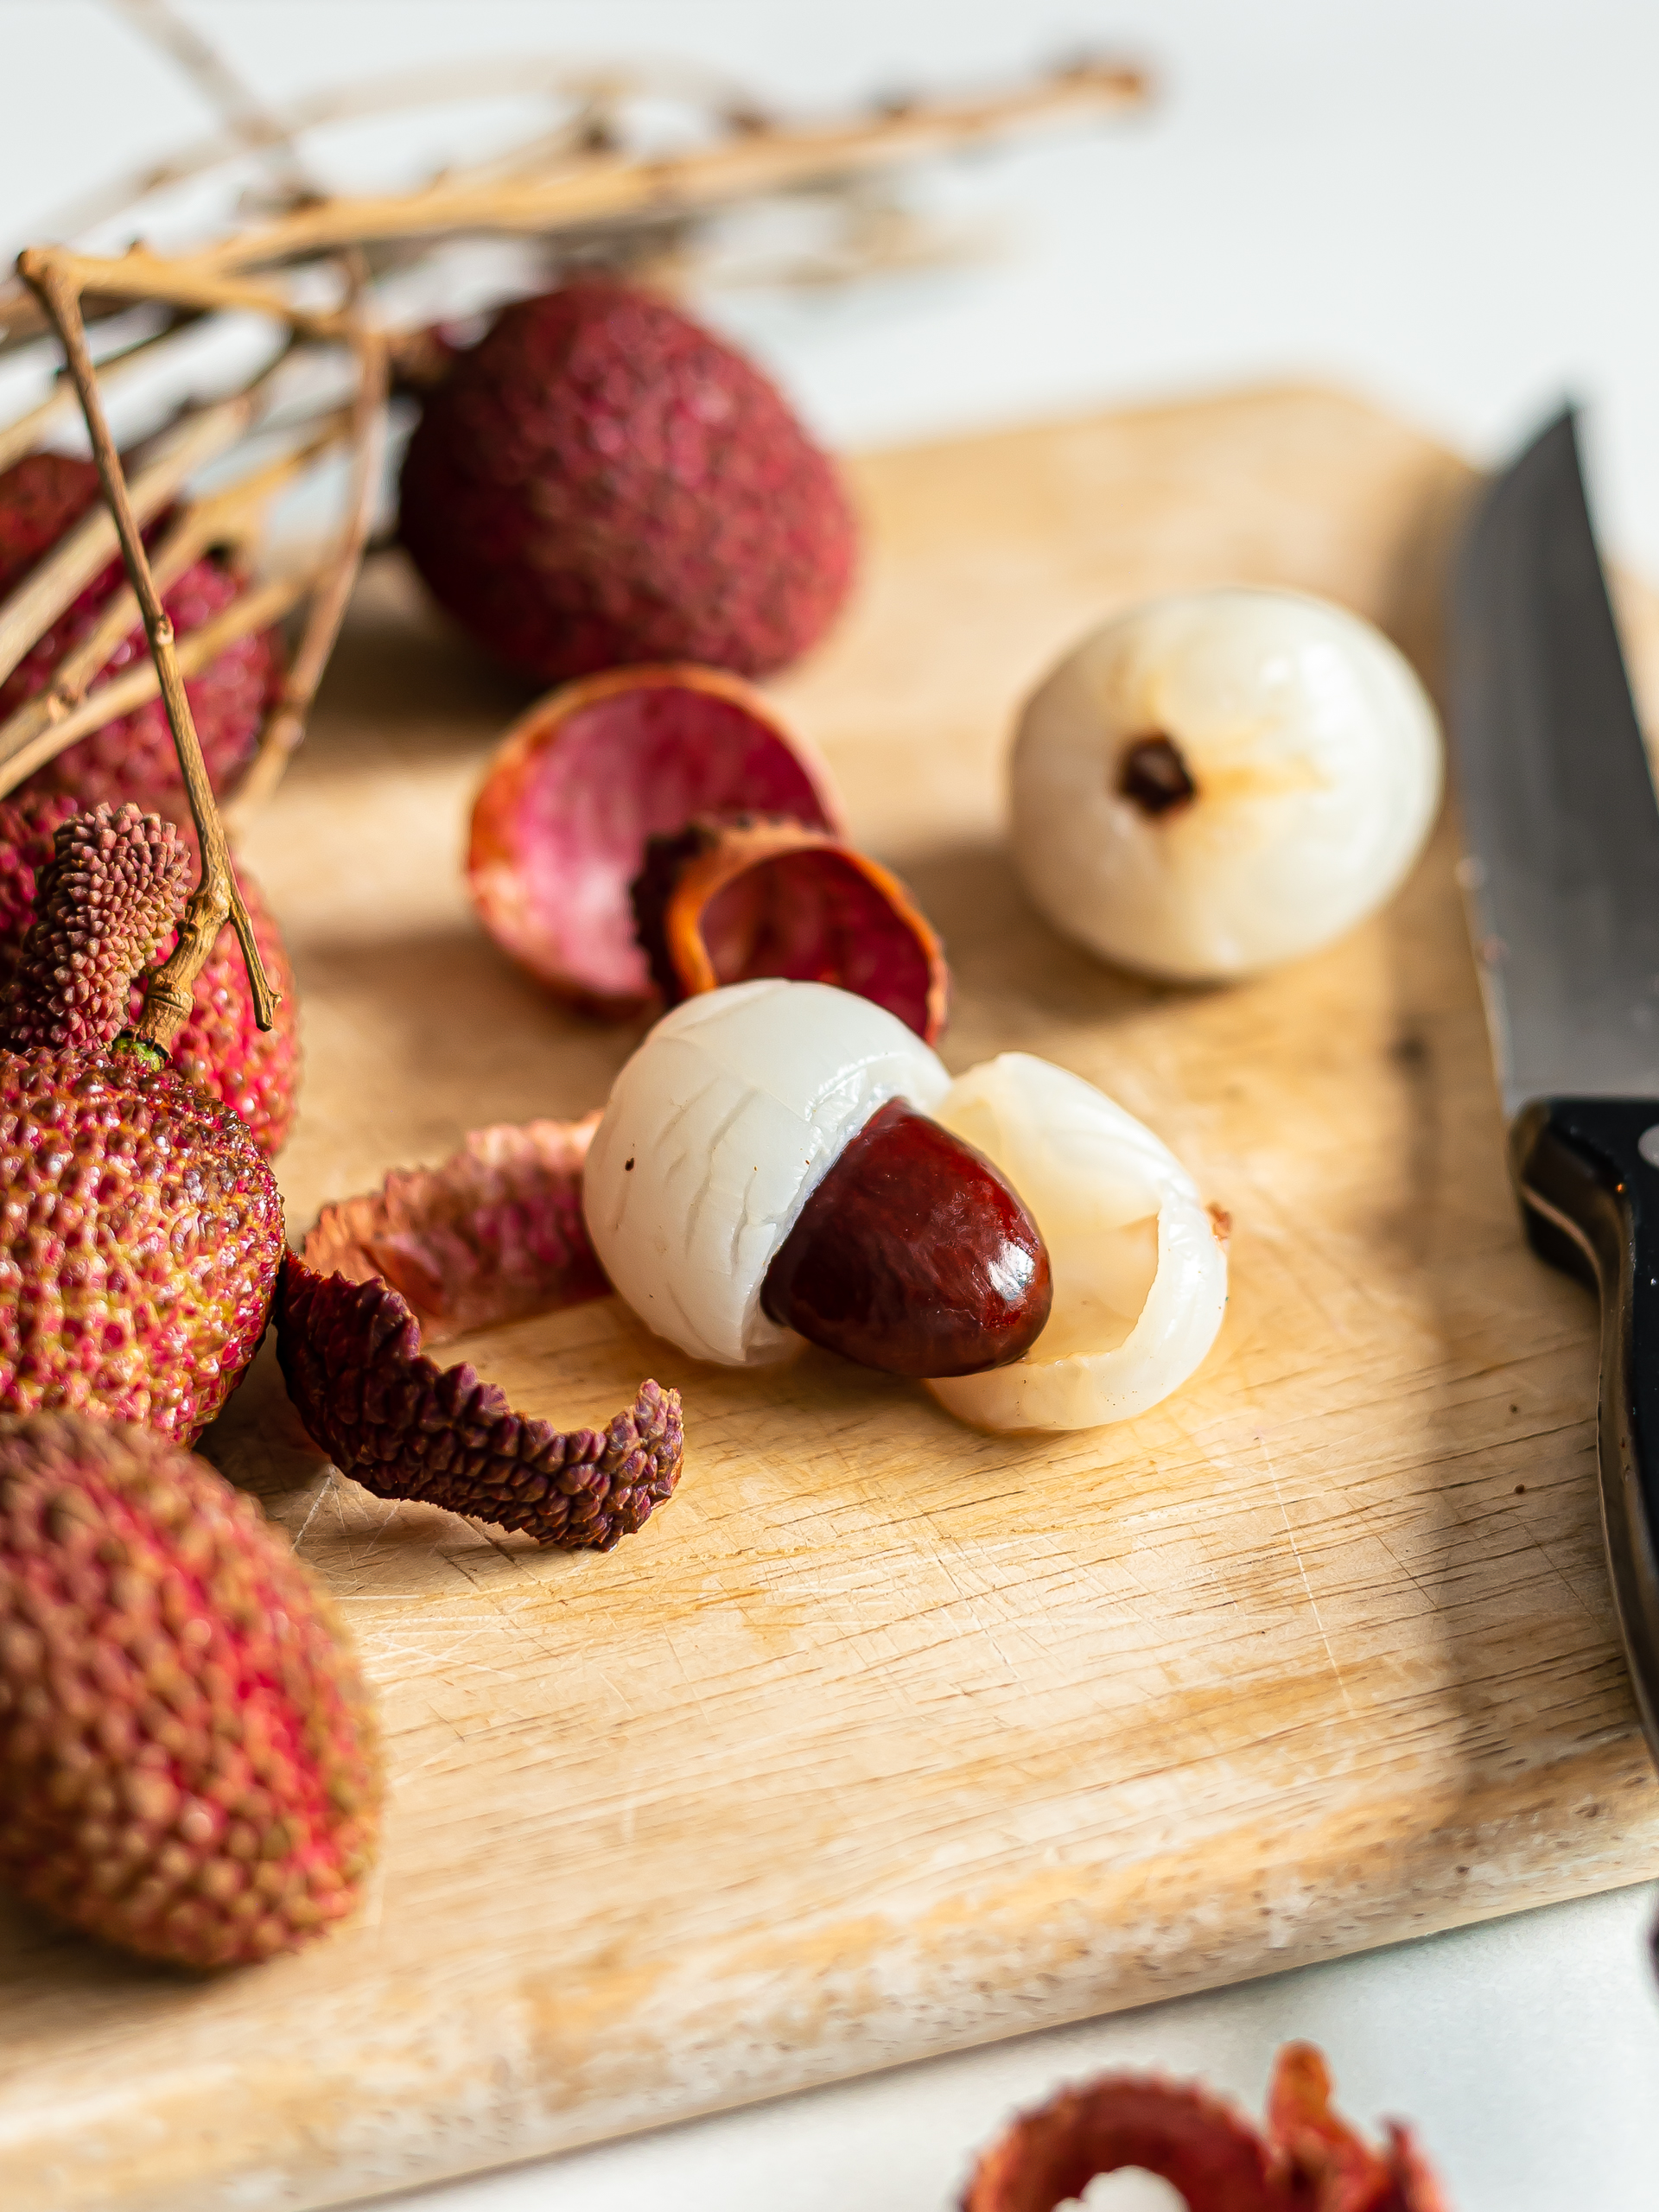 lychees with shell removed